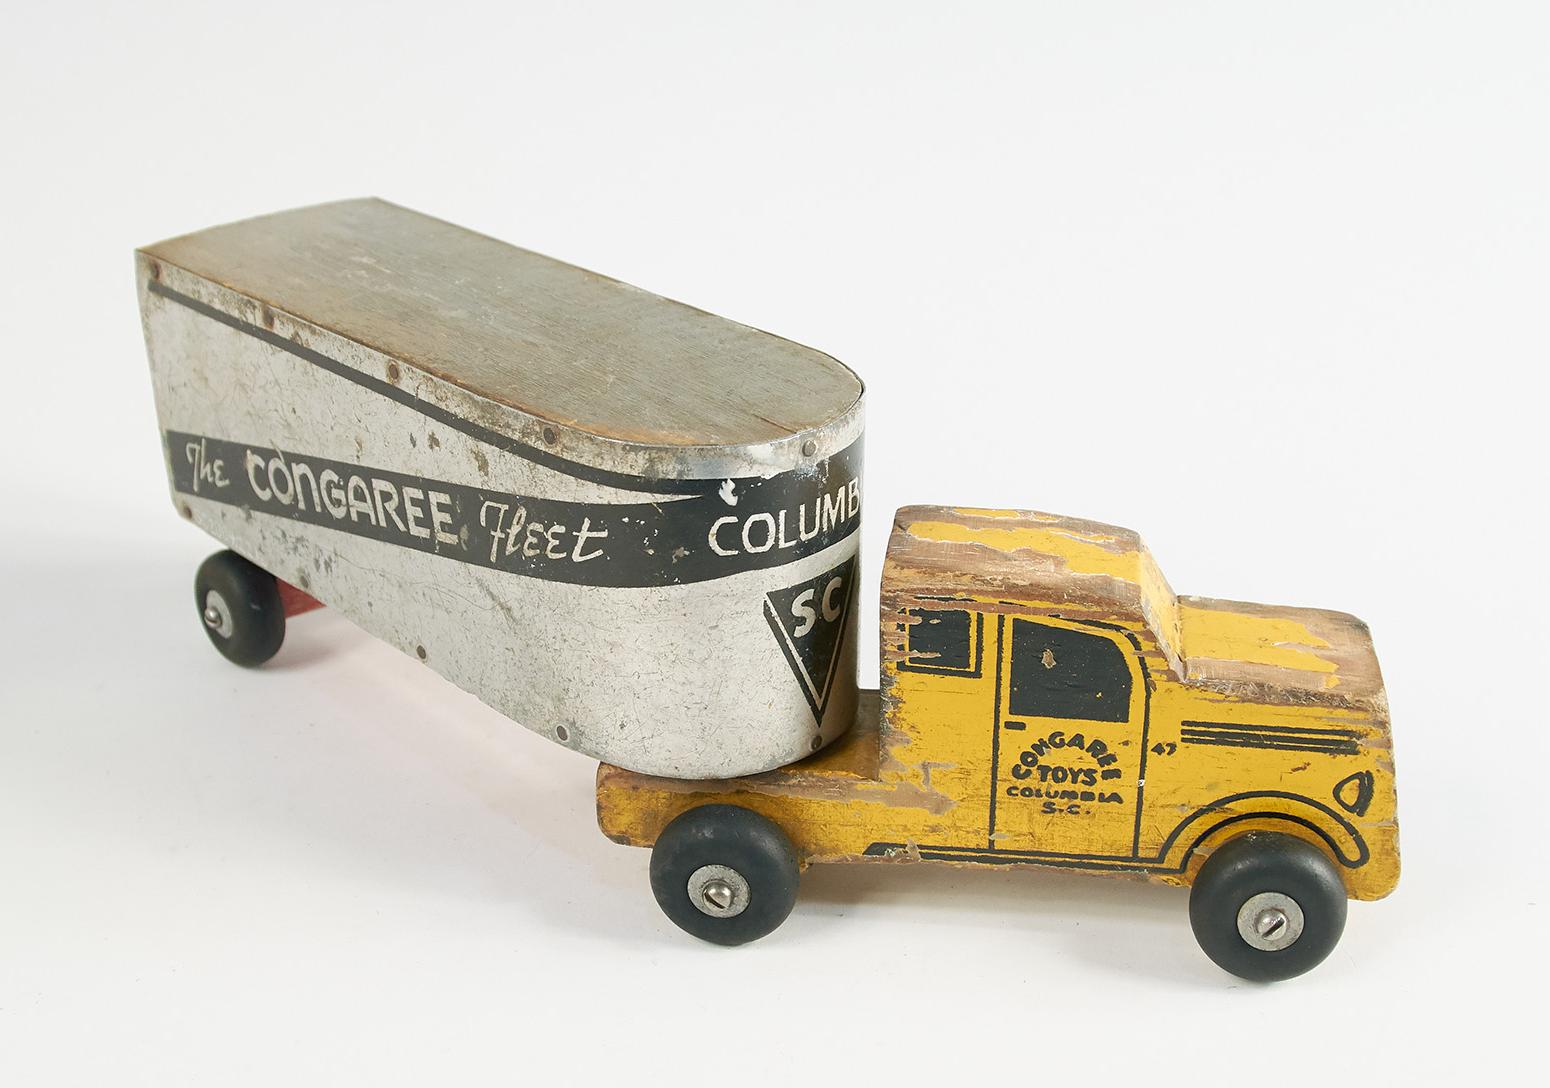 A toy truck with a yellow can and a trailer that says Congaree Fleet